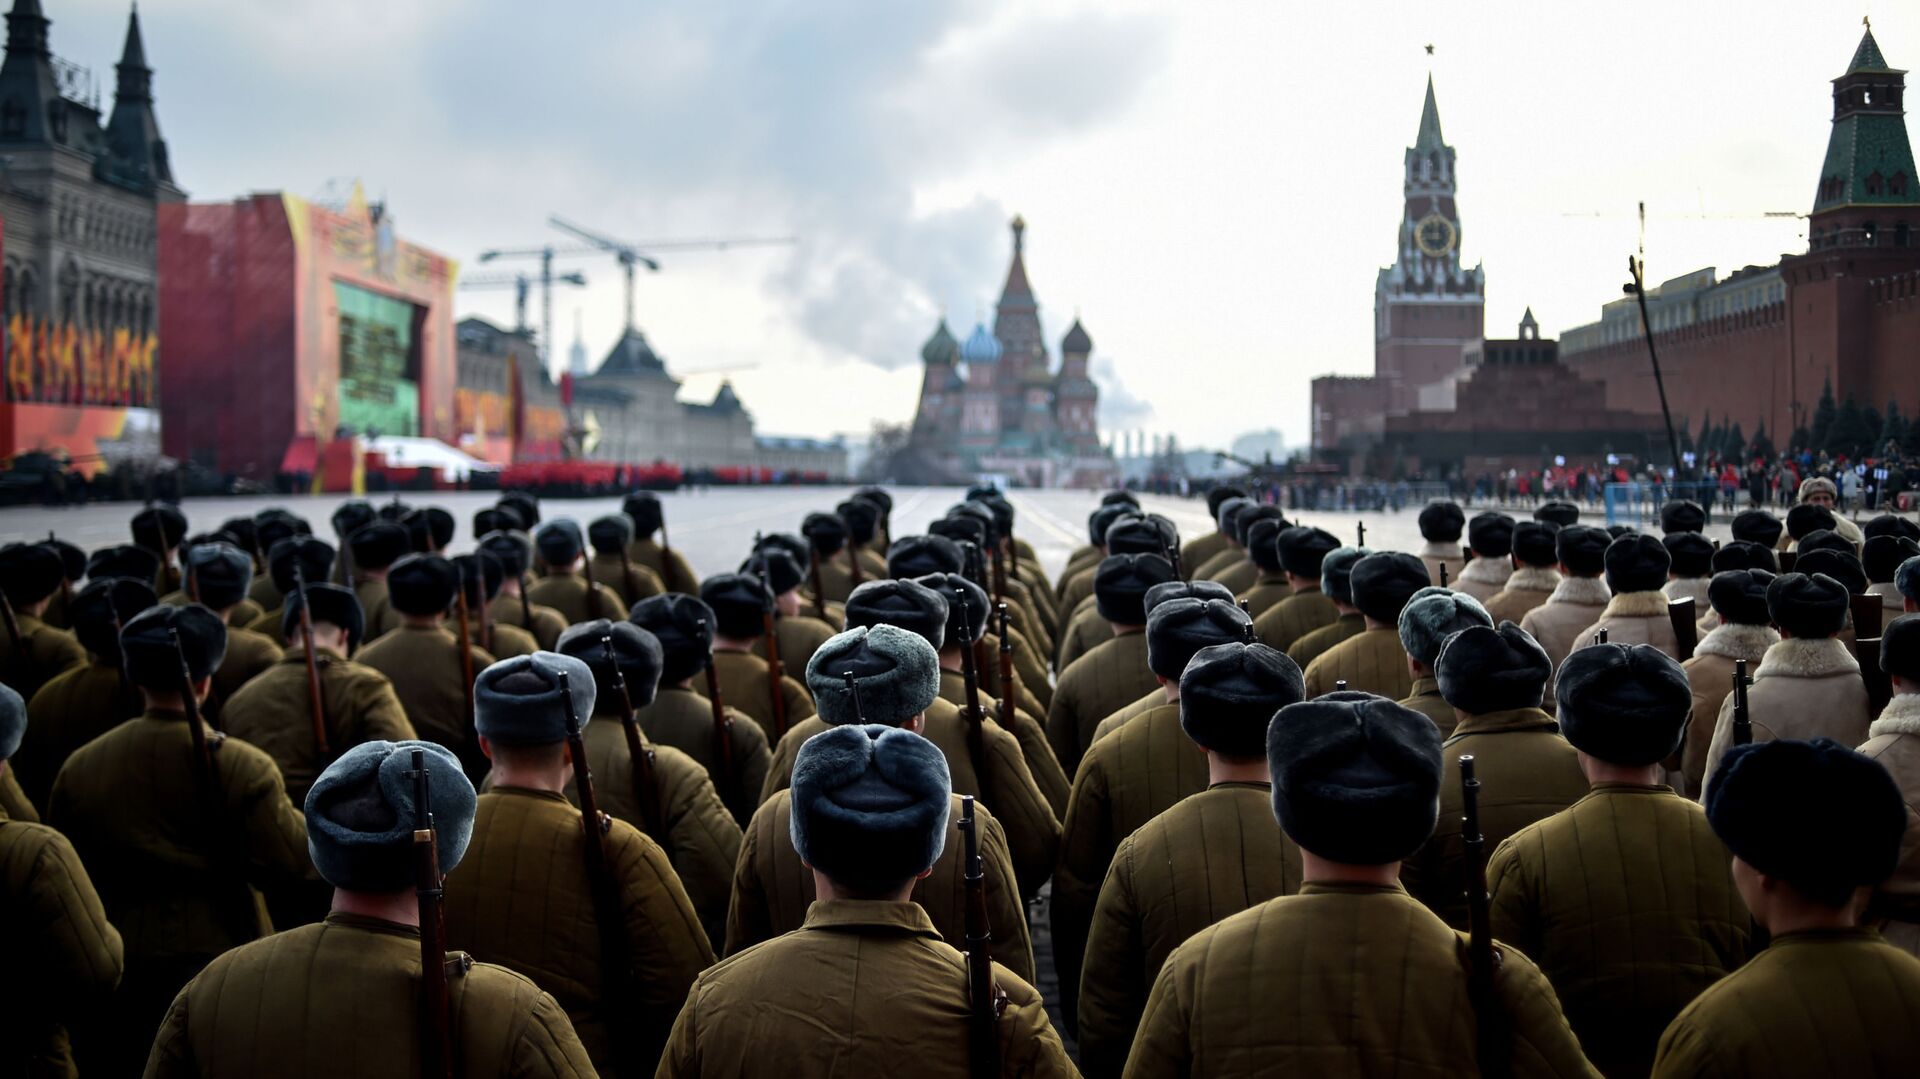 Russian soldiers wearing Red Army World War II uniforms  take part in the military parade on the Red Square in Moscow (File) - Sputnik International, 1920, 27.11.2021